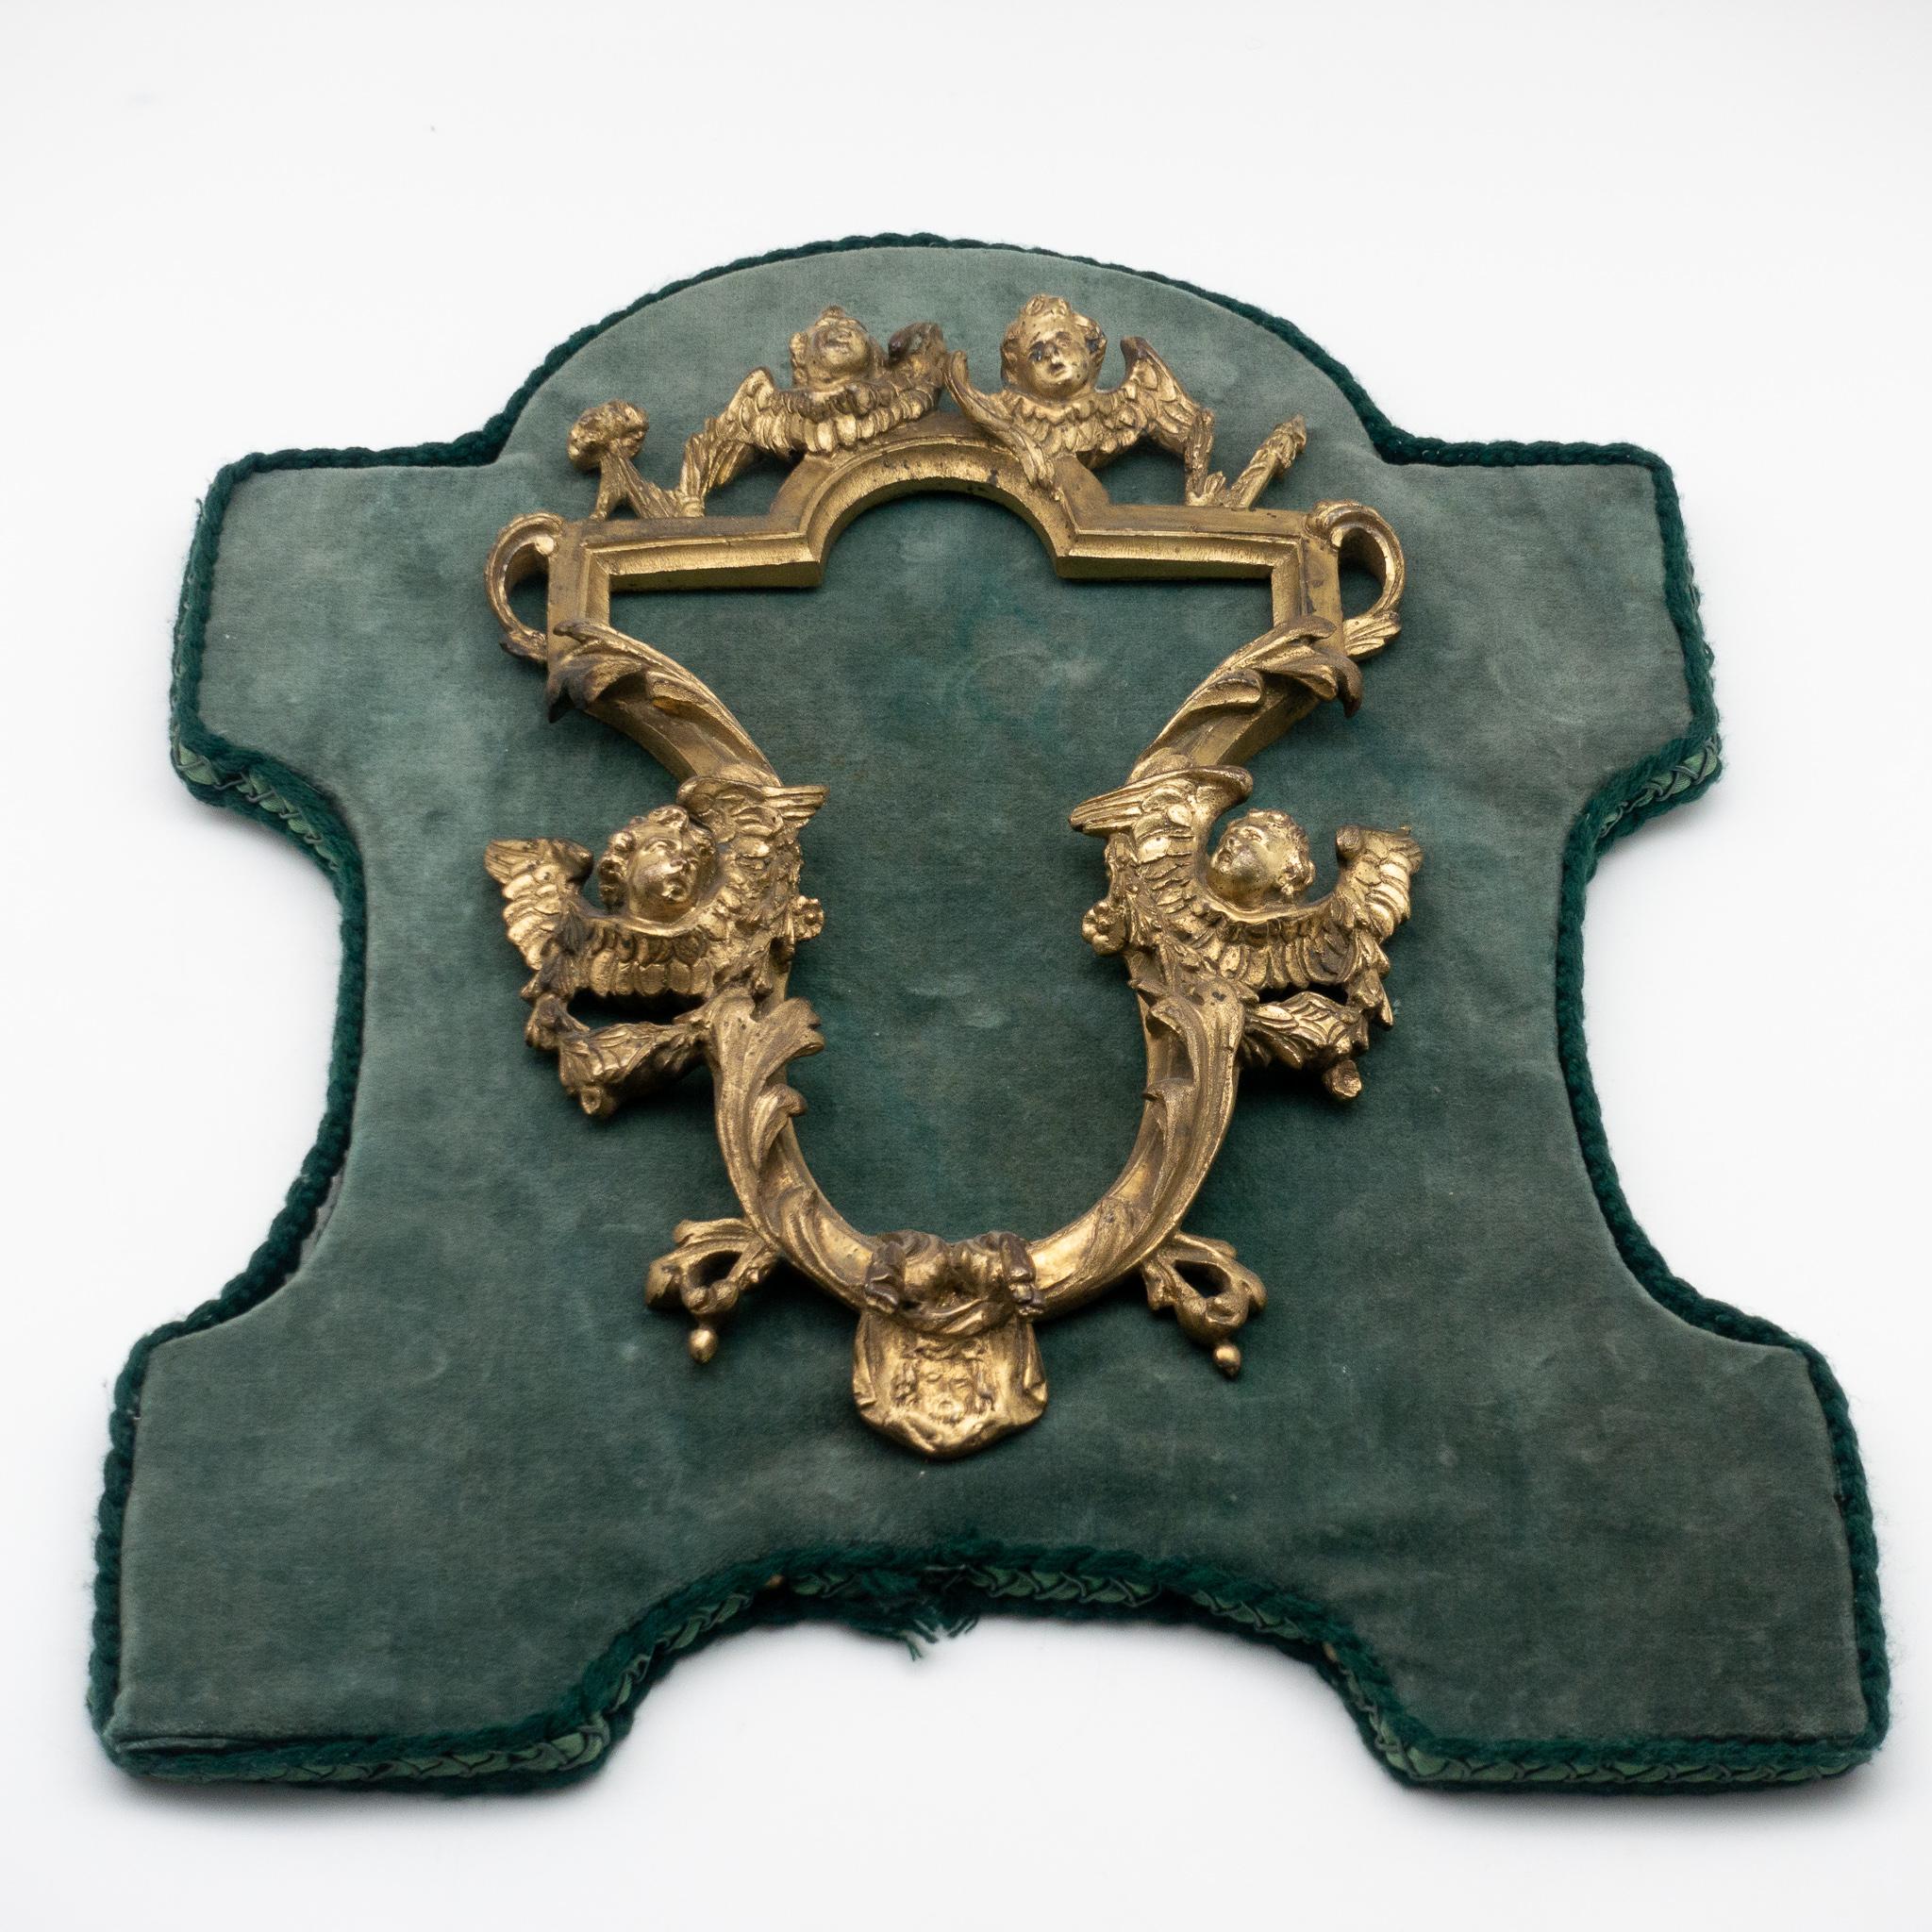 18th Century French Rococo Gilded Bronze Frame Mounted on Green Velvet For Sale 6